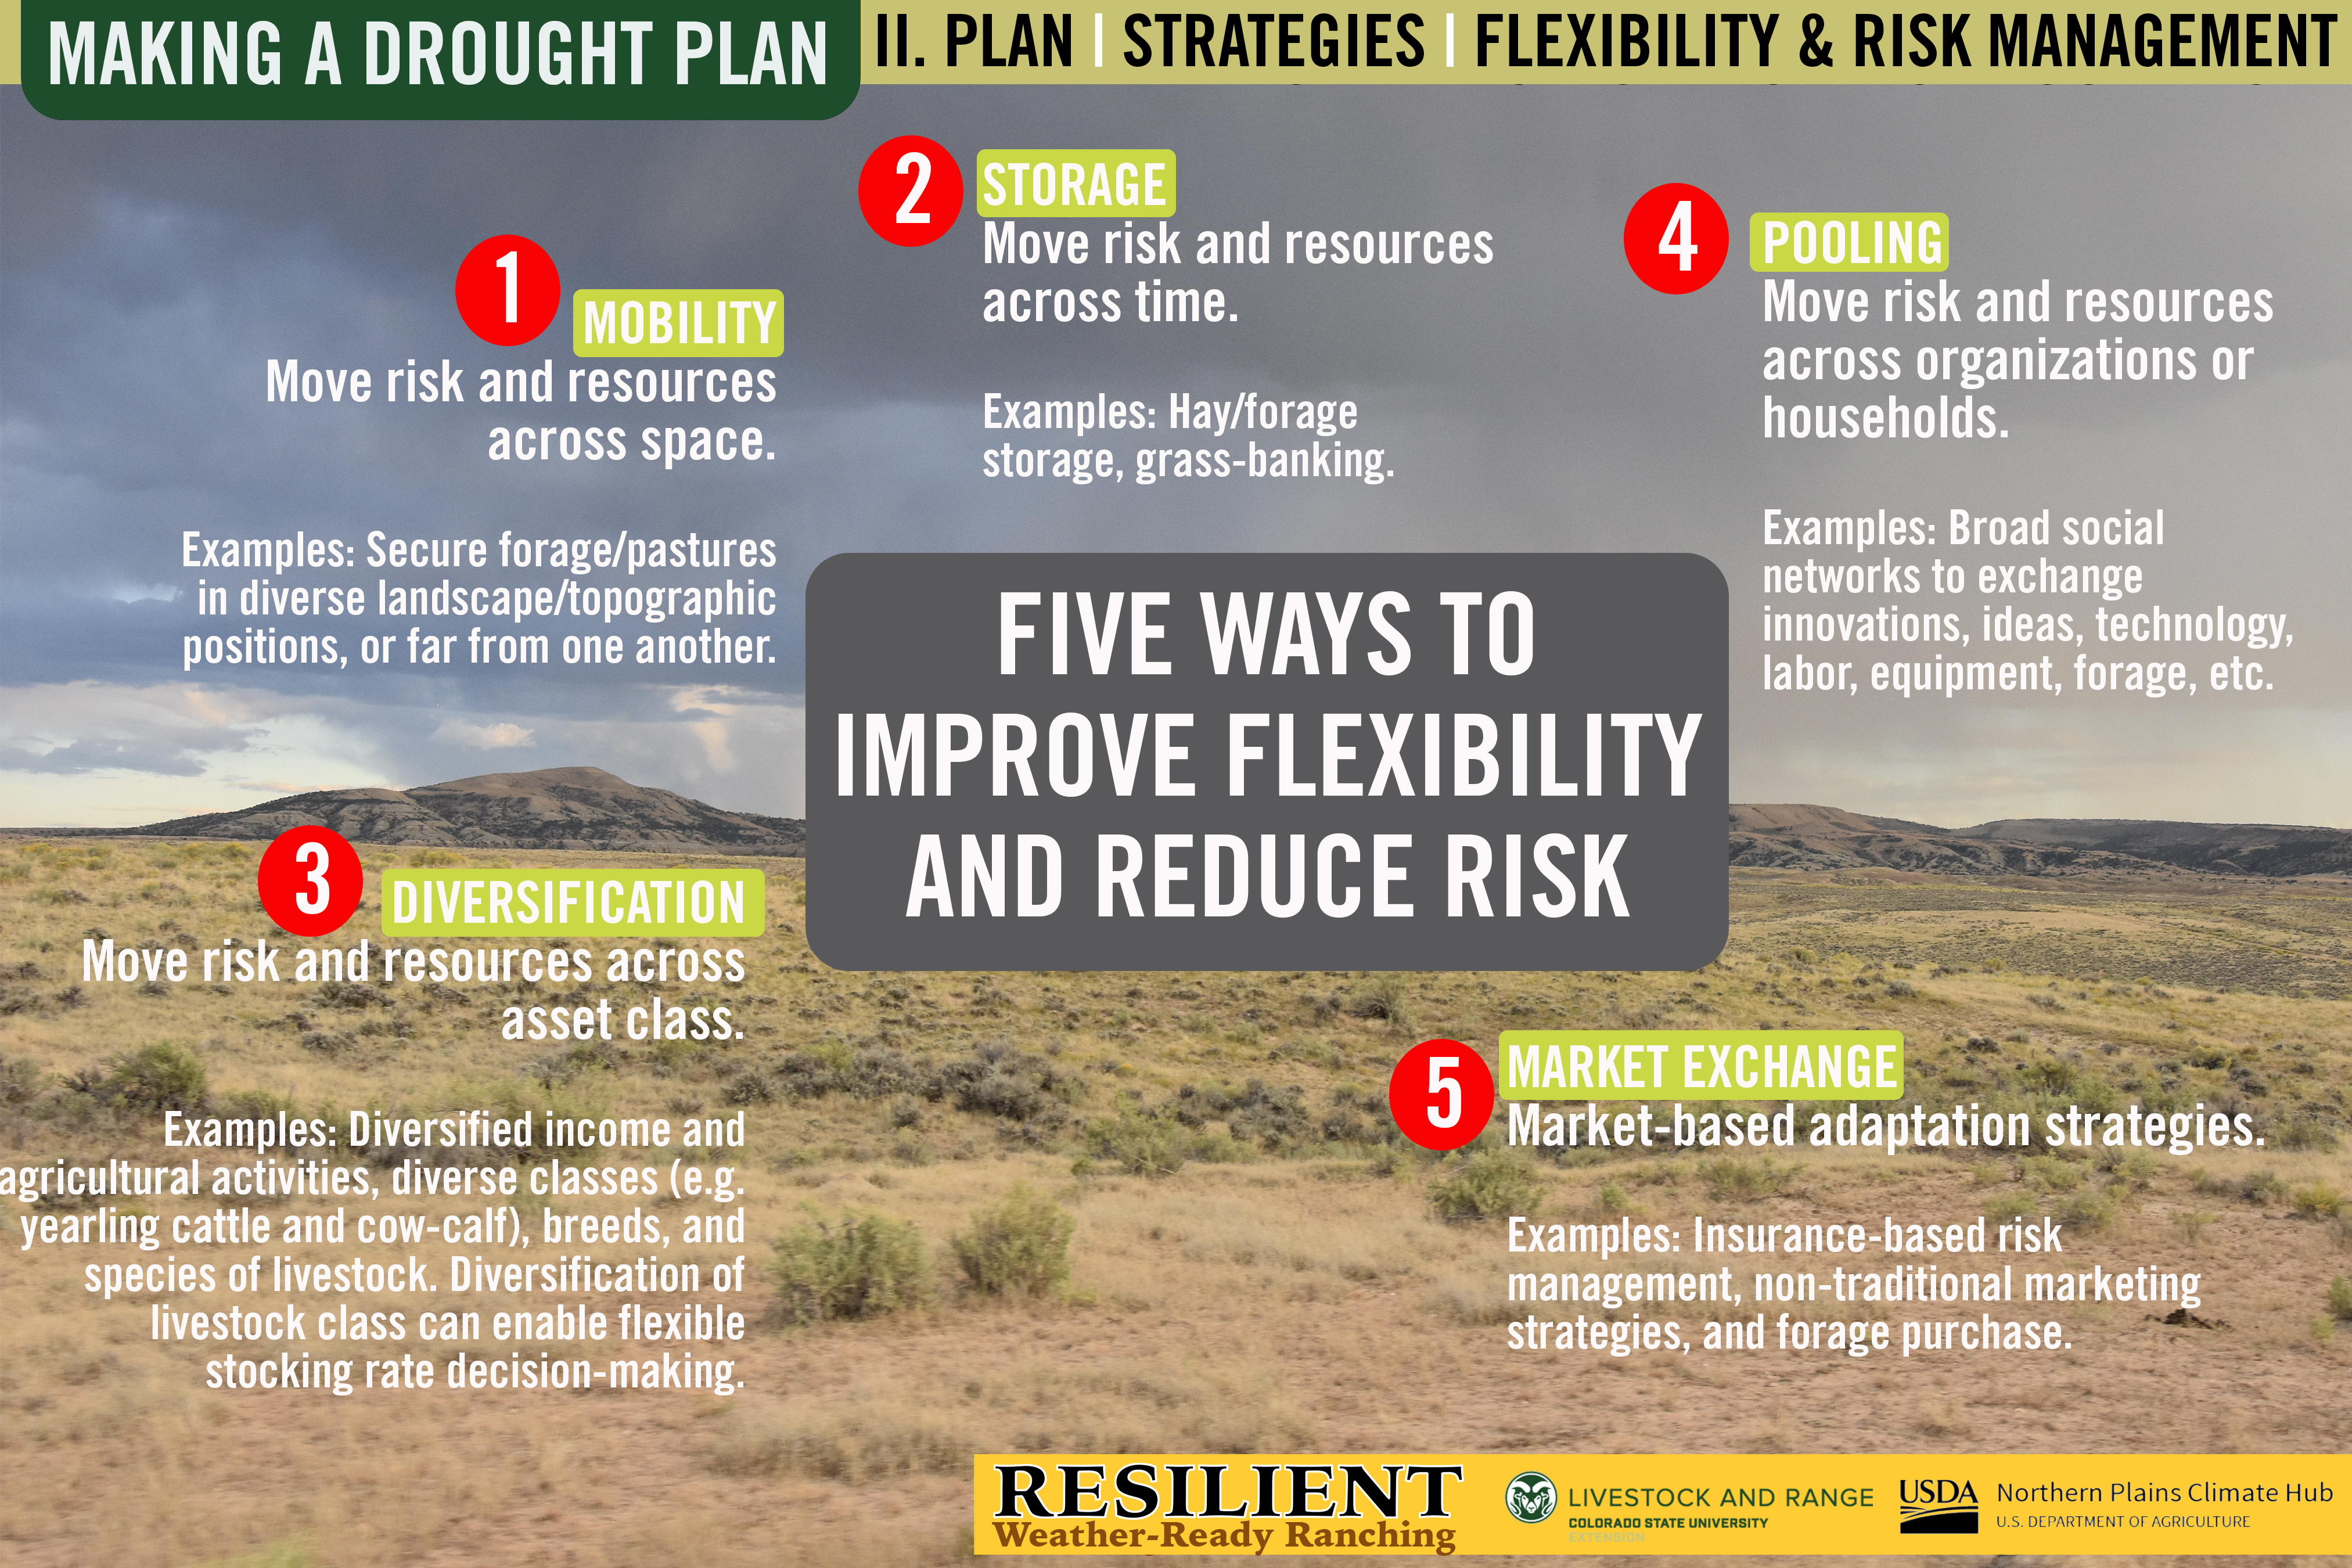 Making a Drought Plan: Five Ways to Improve Flexiblity & Reduce Risk